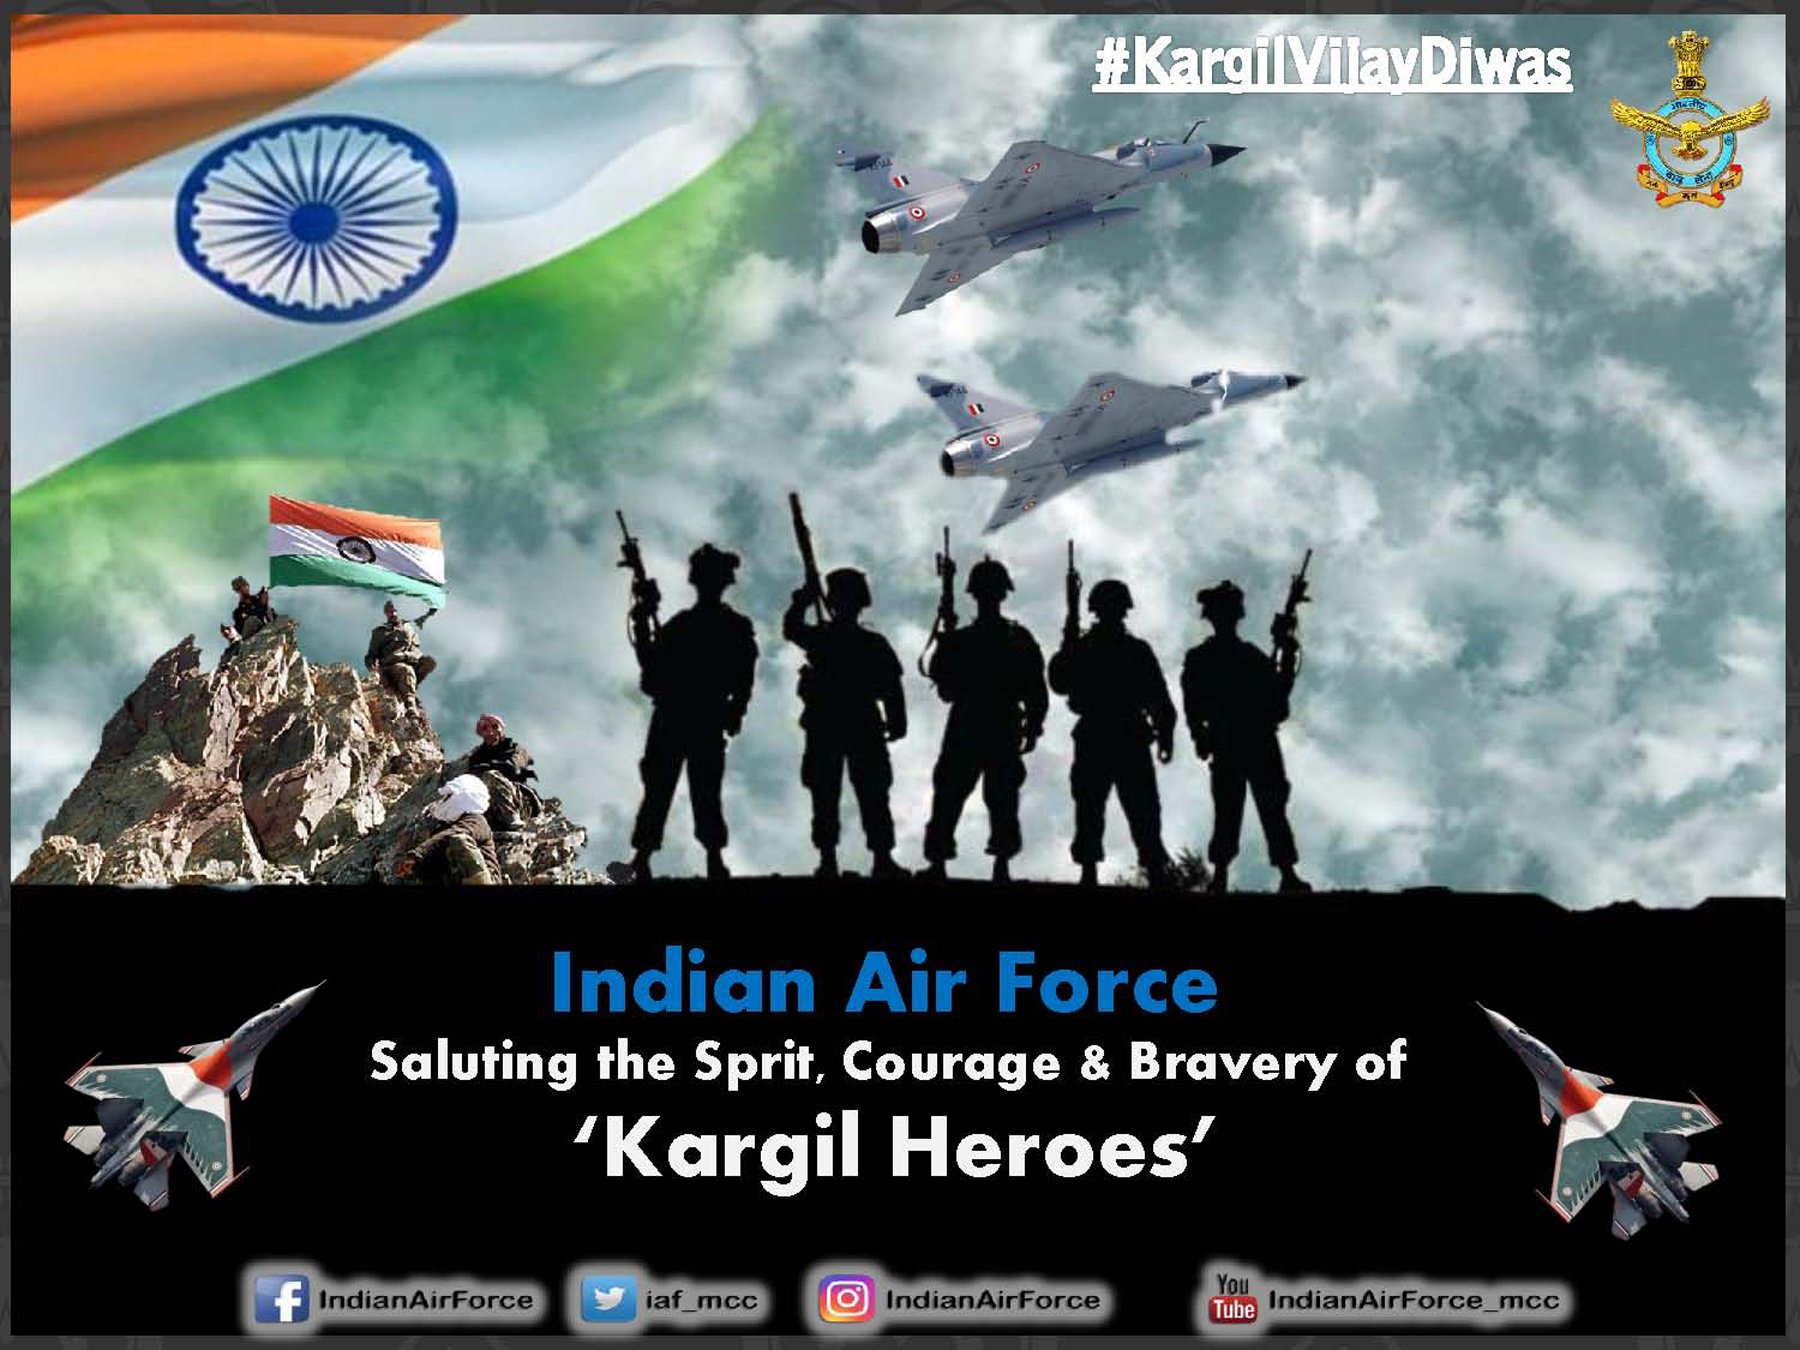 Indian Air Force - #KargilVijayDiwas, named after the success of Operation Vijay. On 26 Jul India successfully took command of the high outposts of Kargil, which had been lost